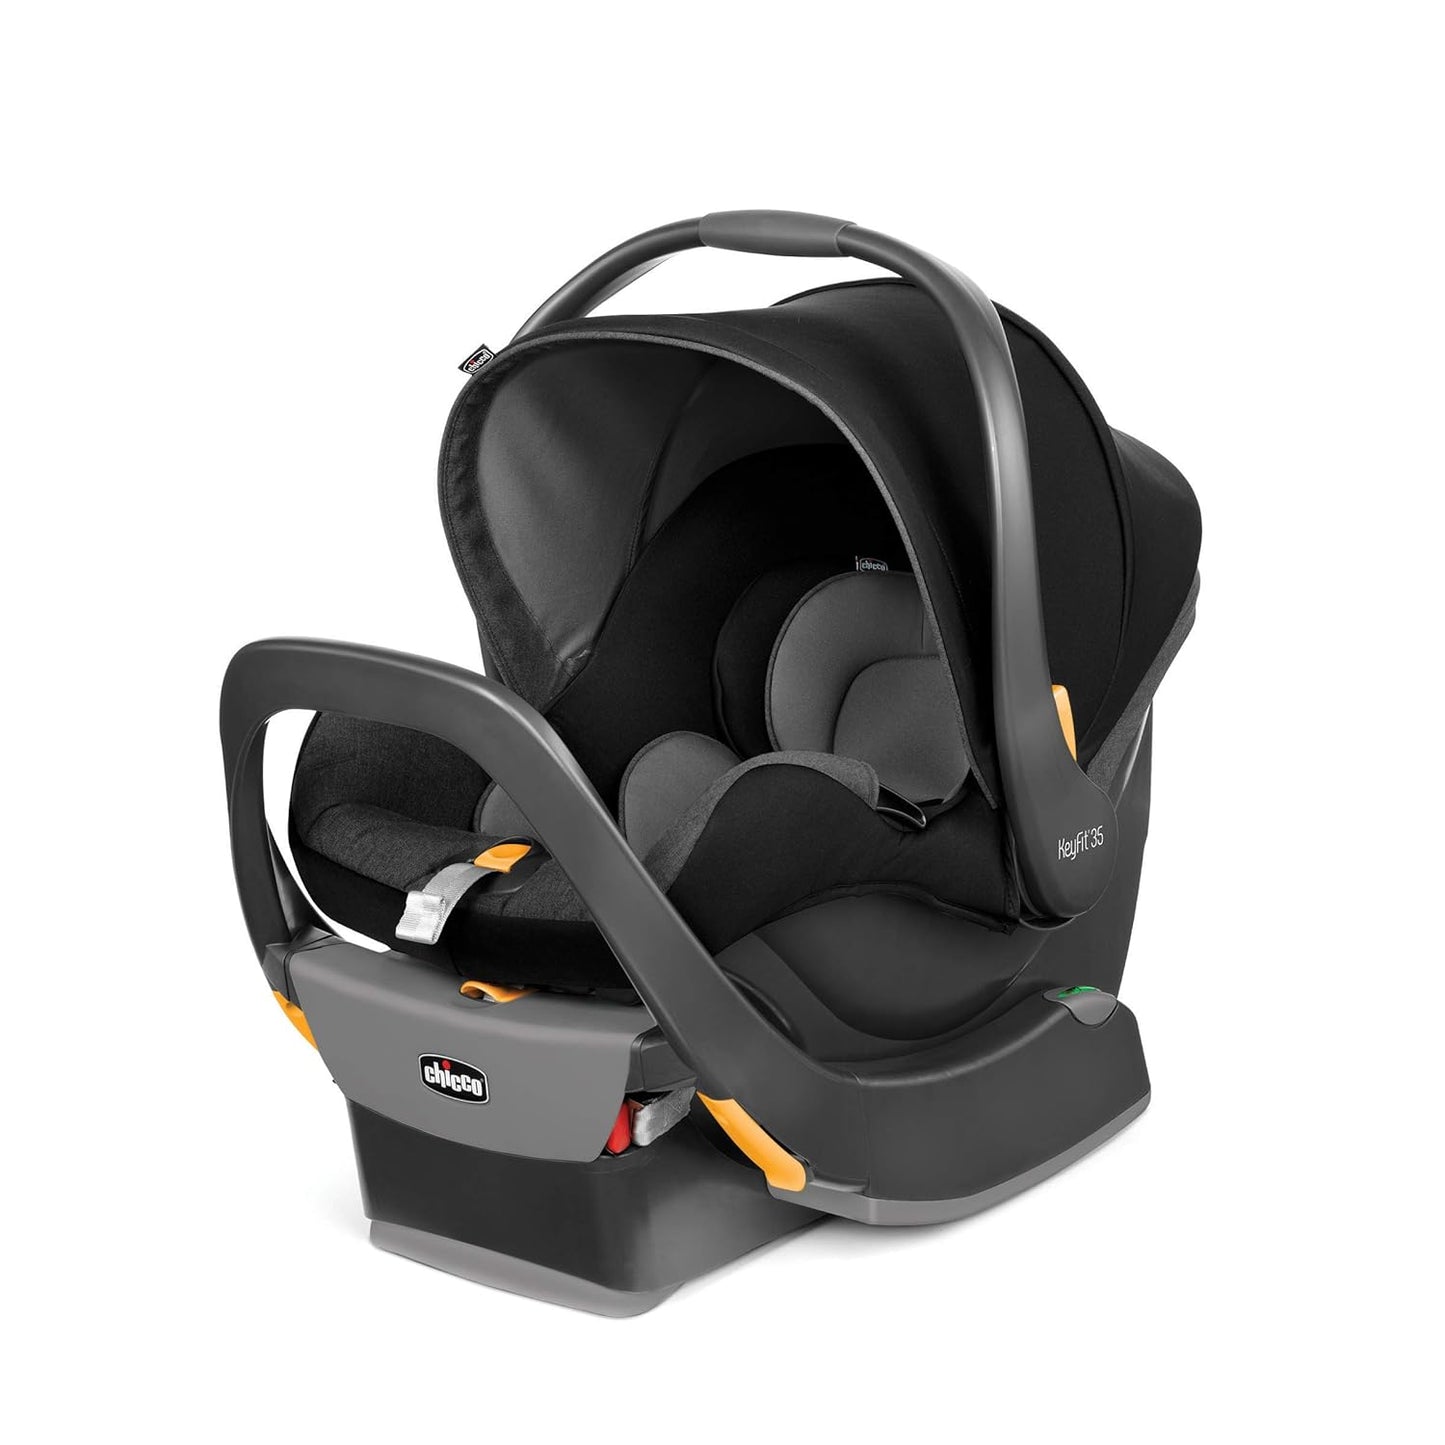 New Chicco Keyfit 35 Infant Car Seat and Base (Onyx)